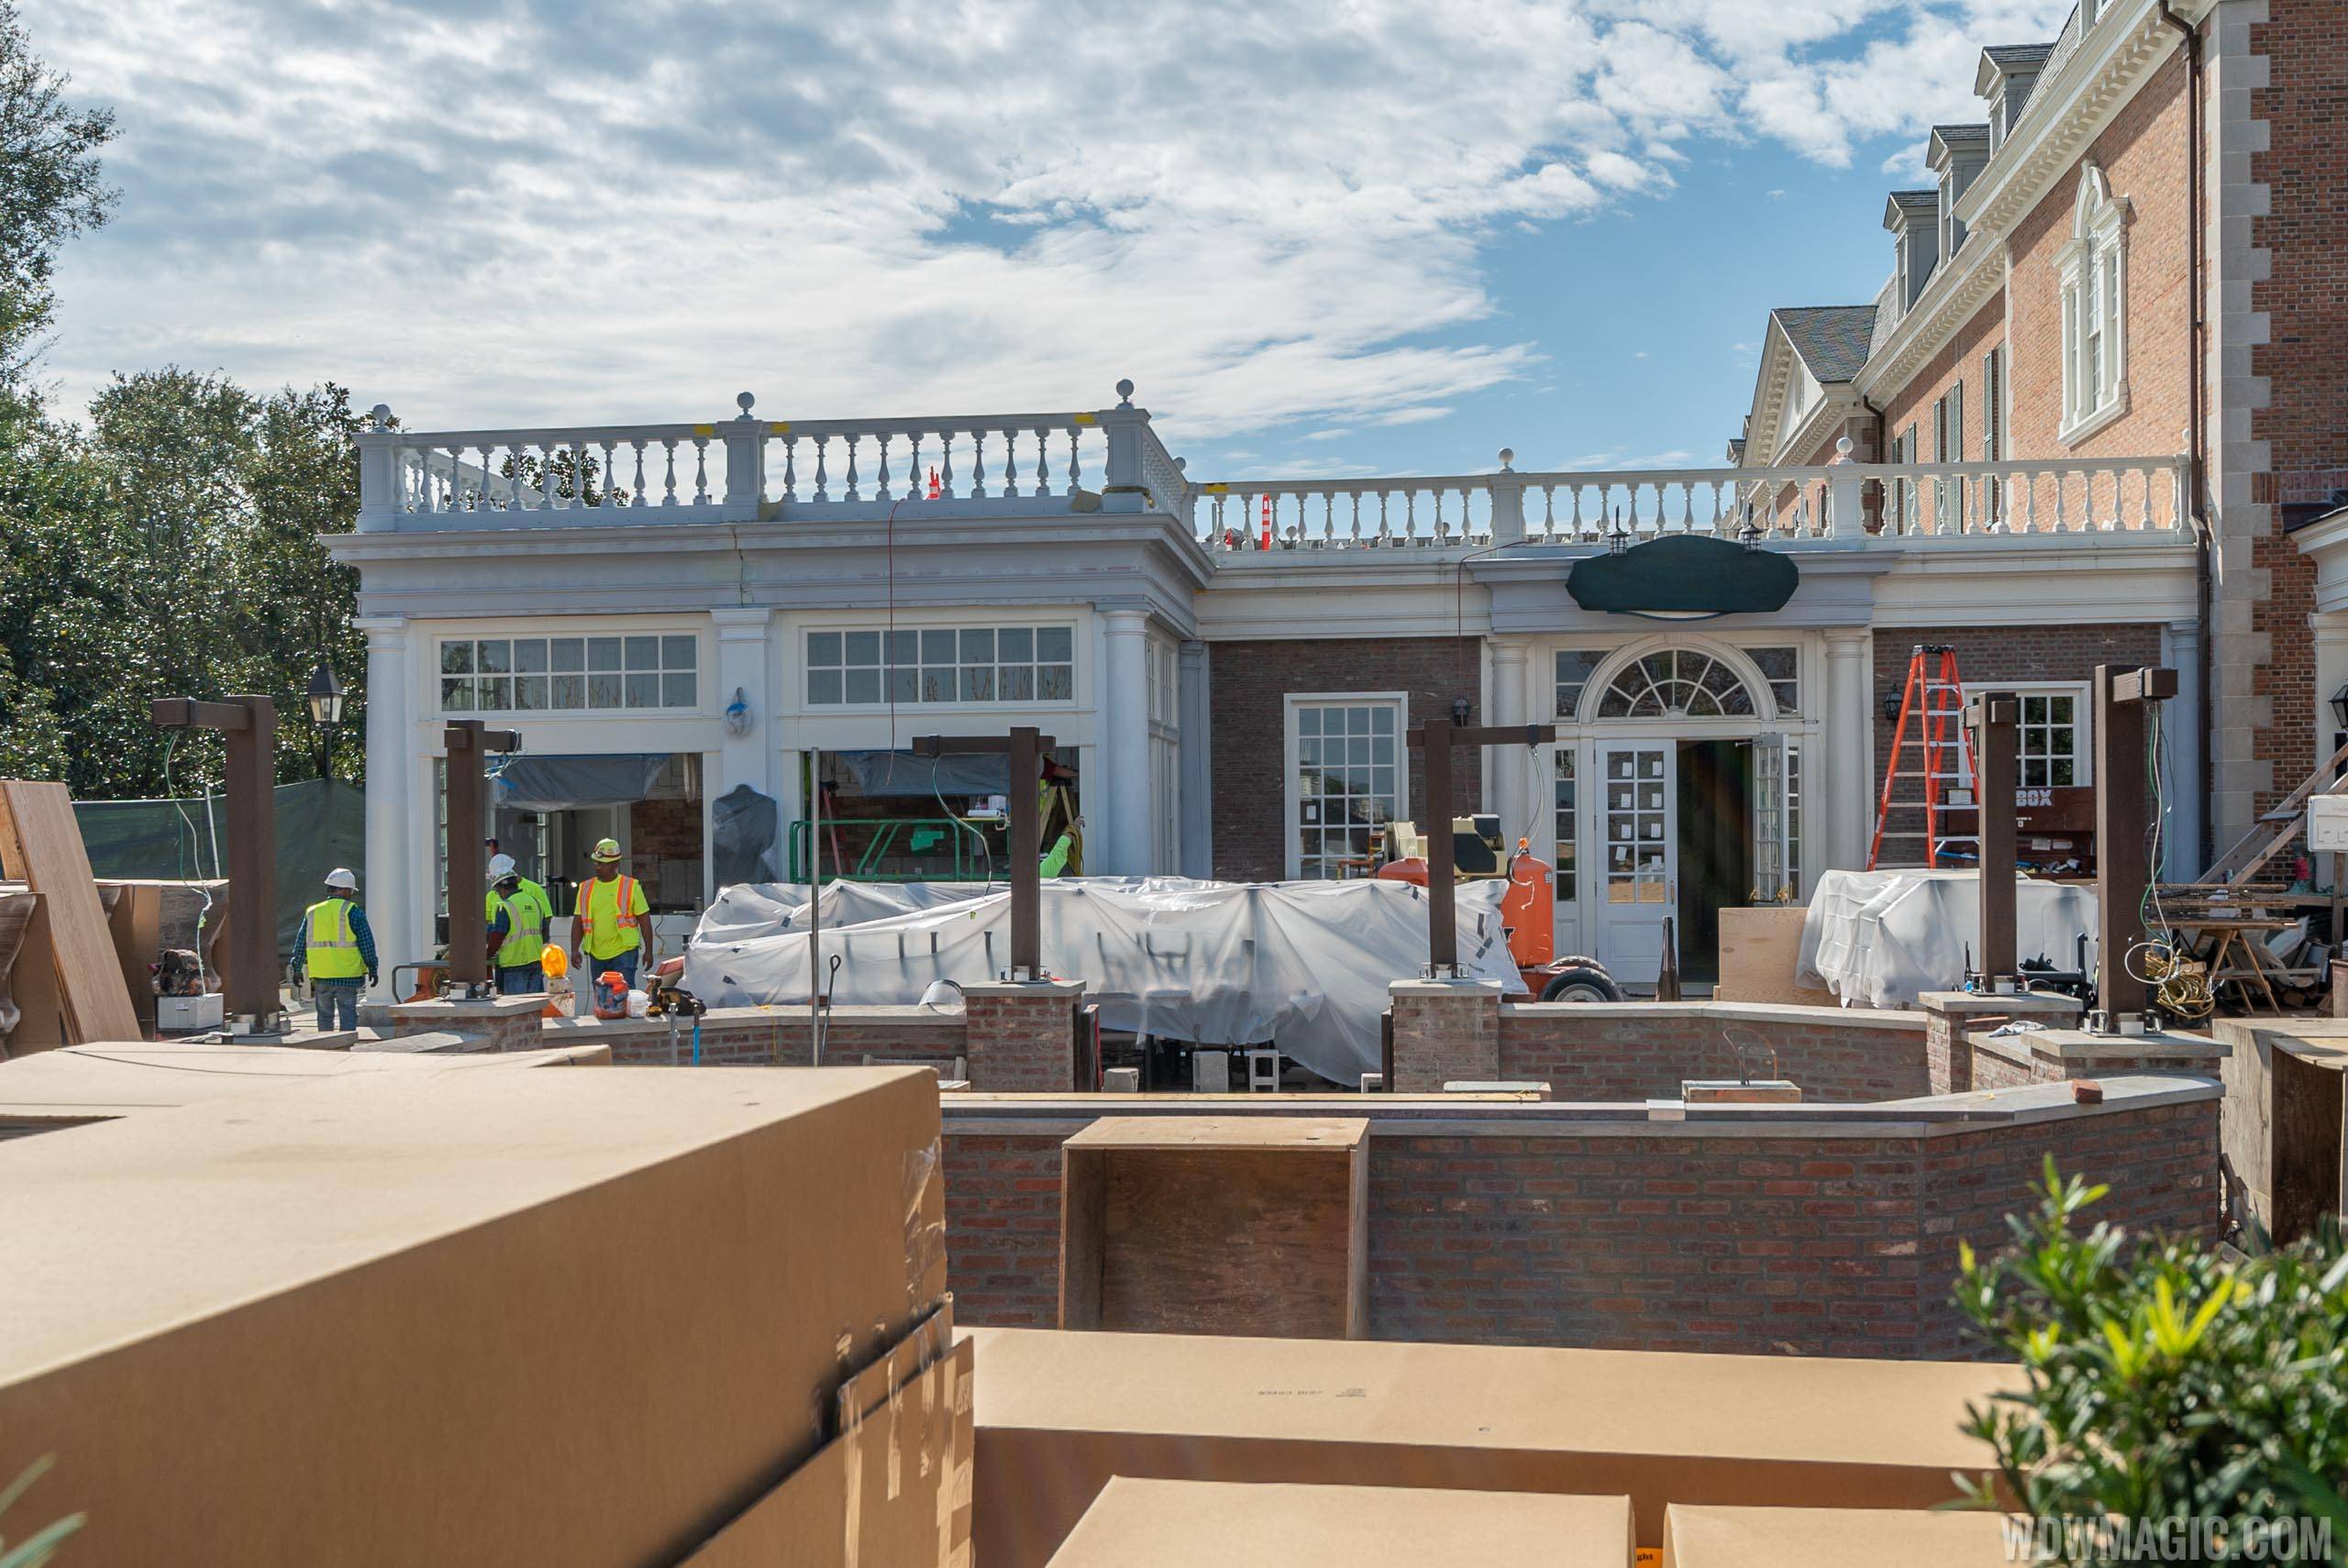 PHOTOS - Smoker area construction well underway at the Regal Eagle Smokehouse in Epcot